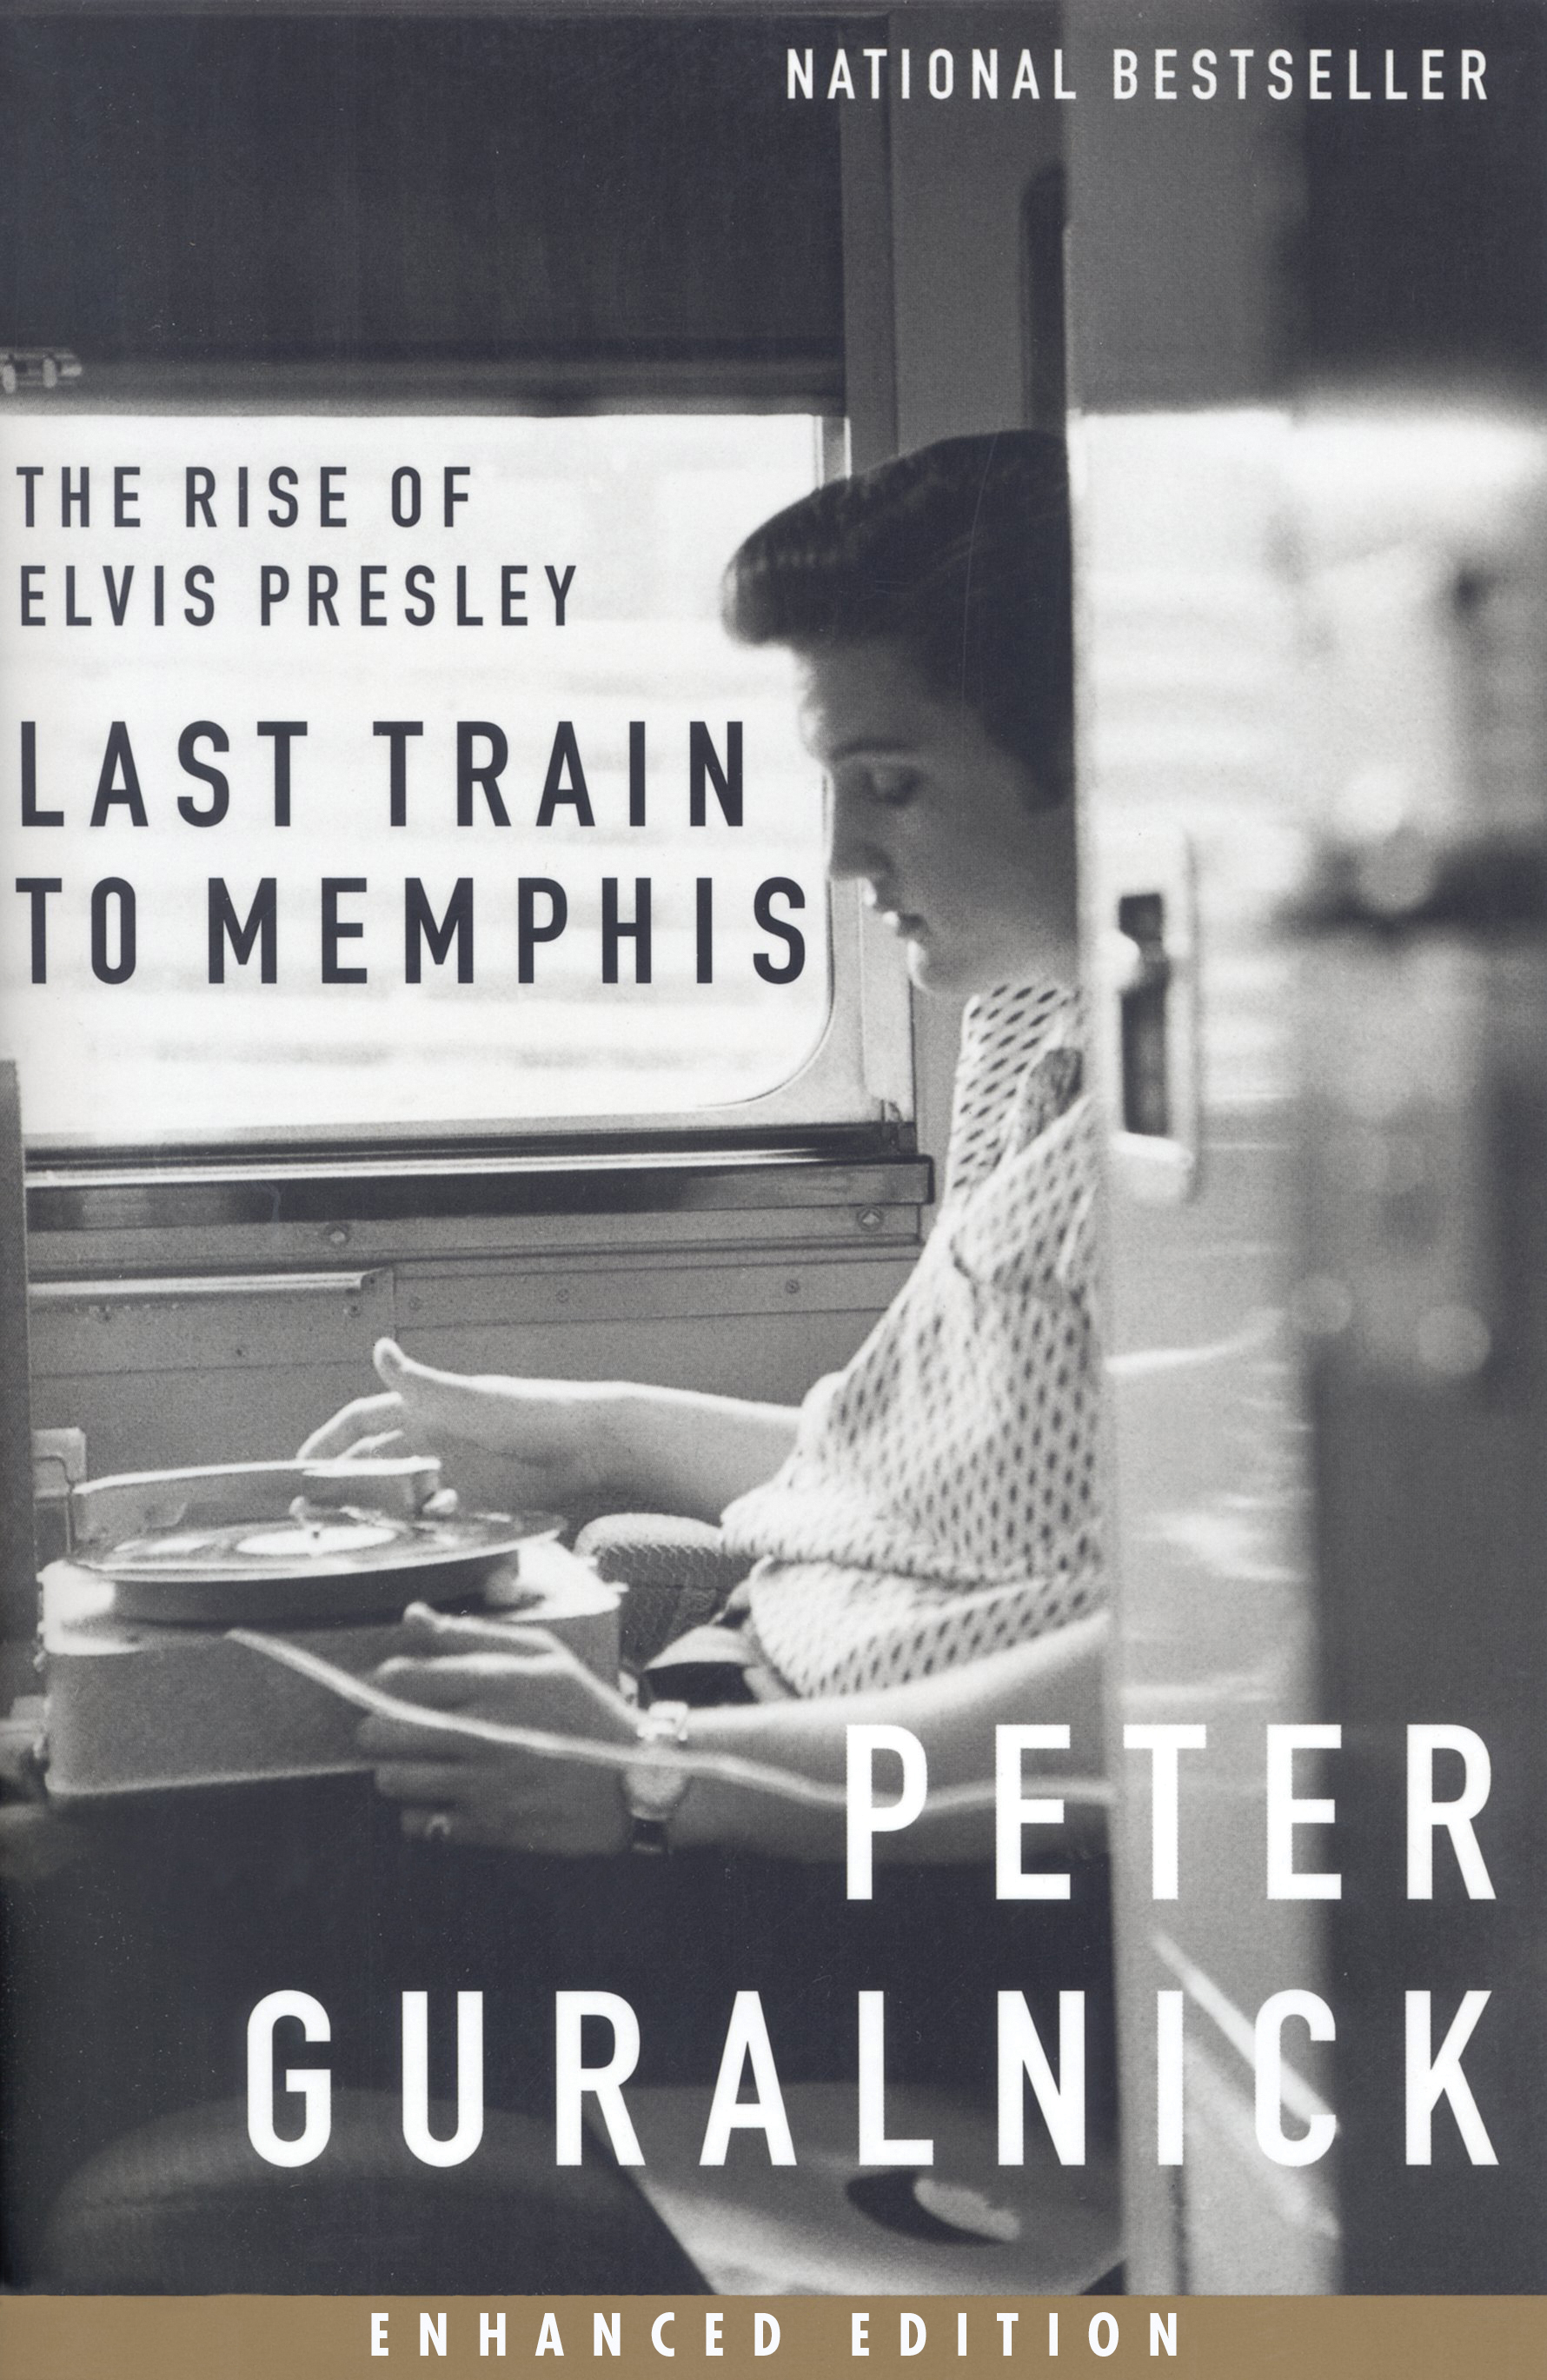 Last Train to Memphis by Peter Guralnick